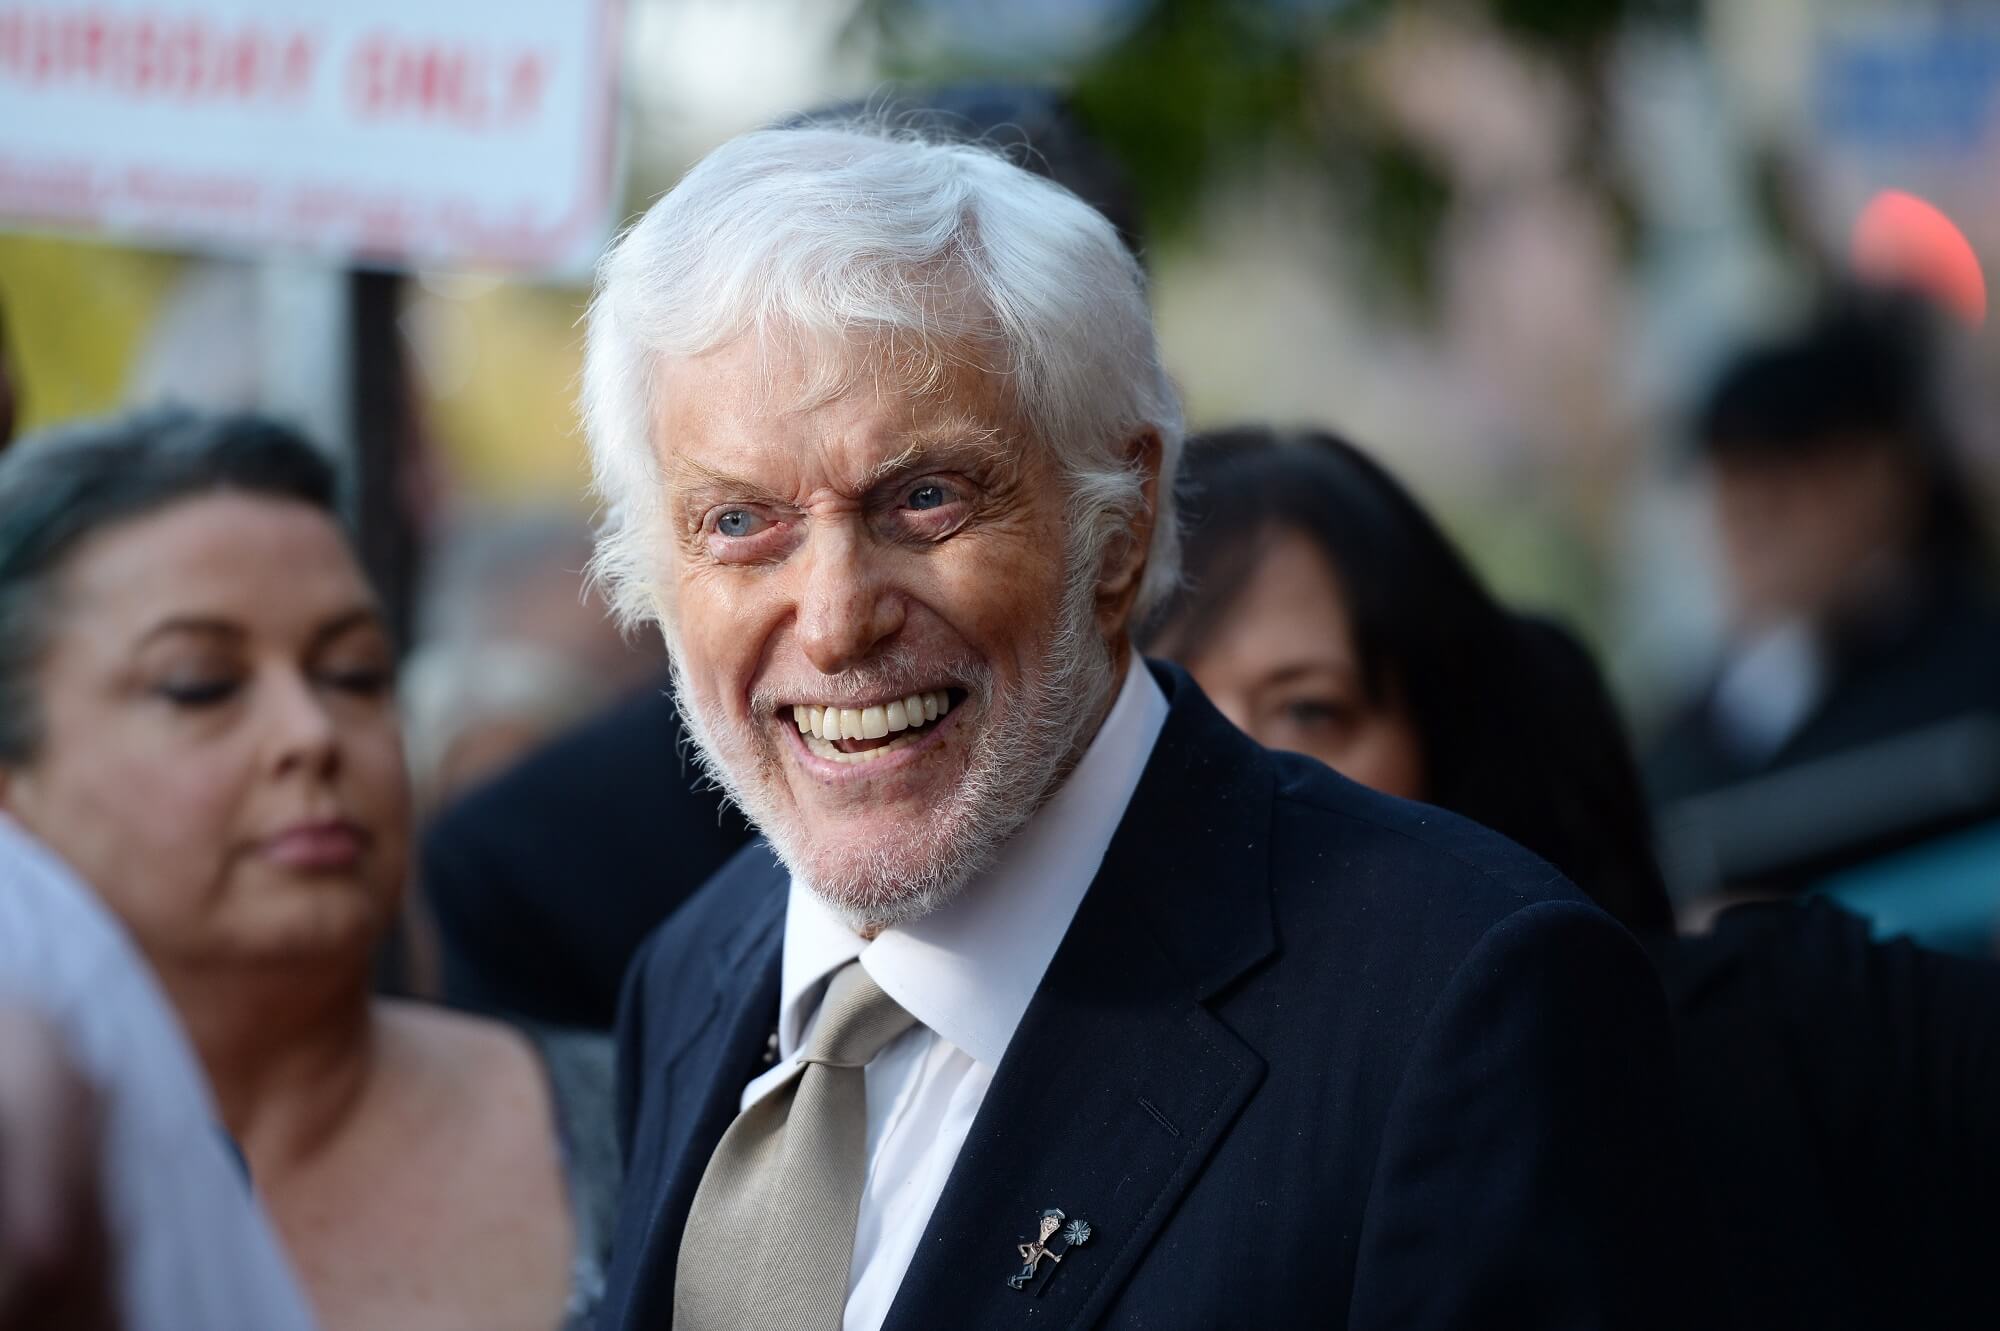 Dick Van Dyke smiles while outside and surrounded by people